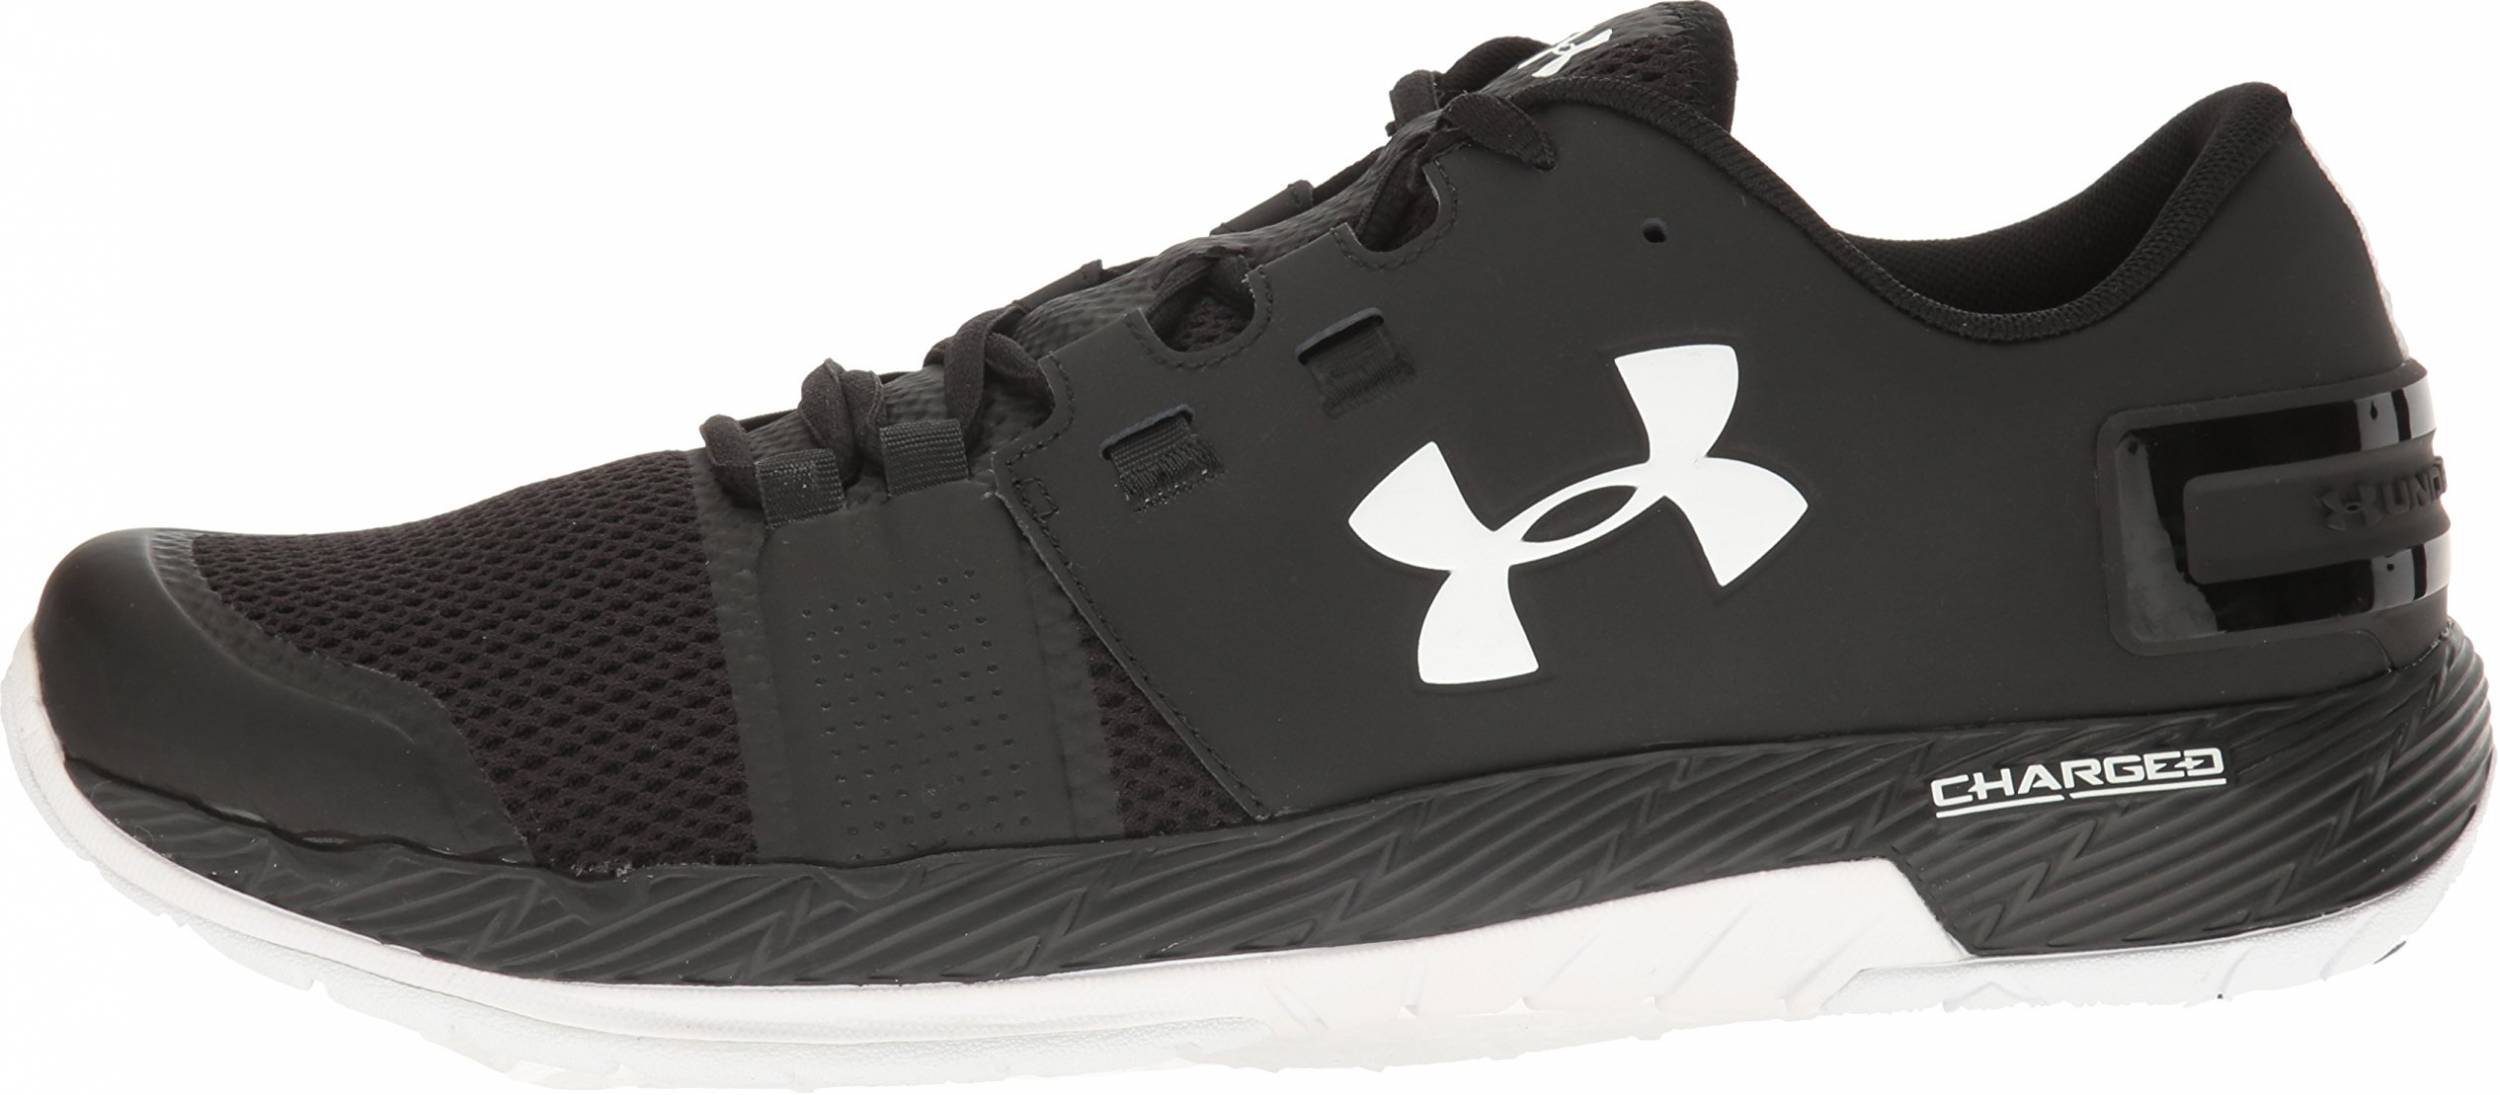 under armor shoes price